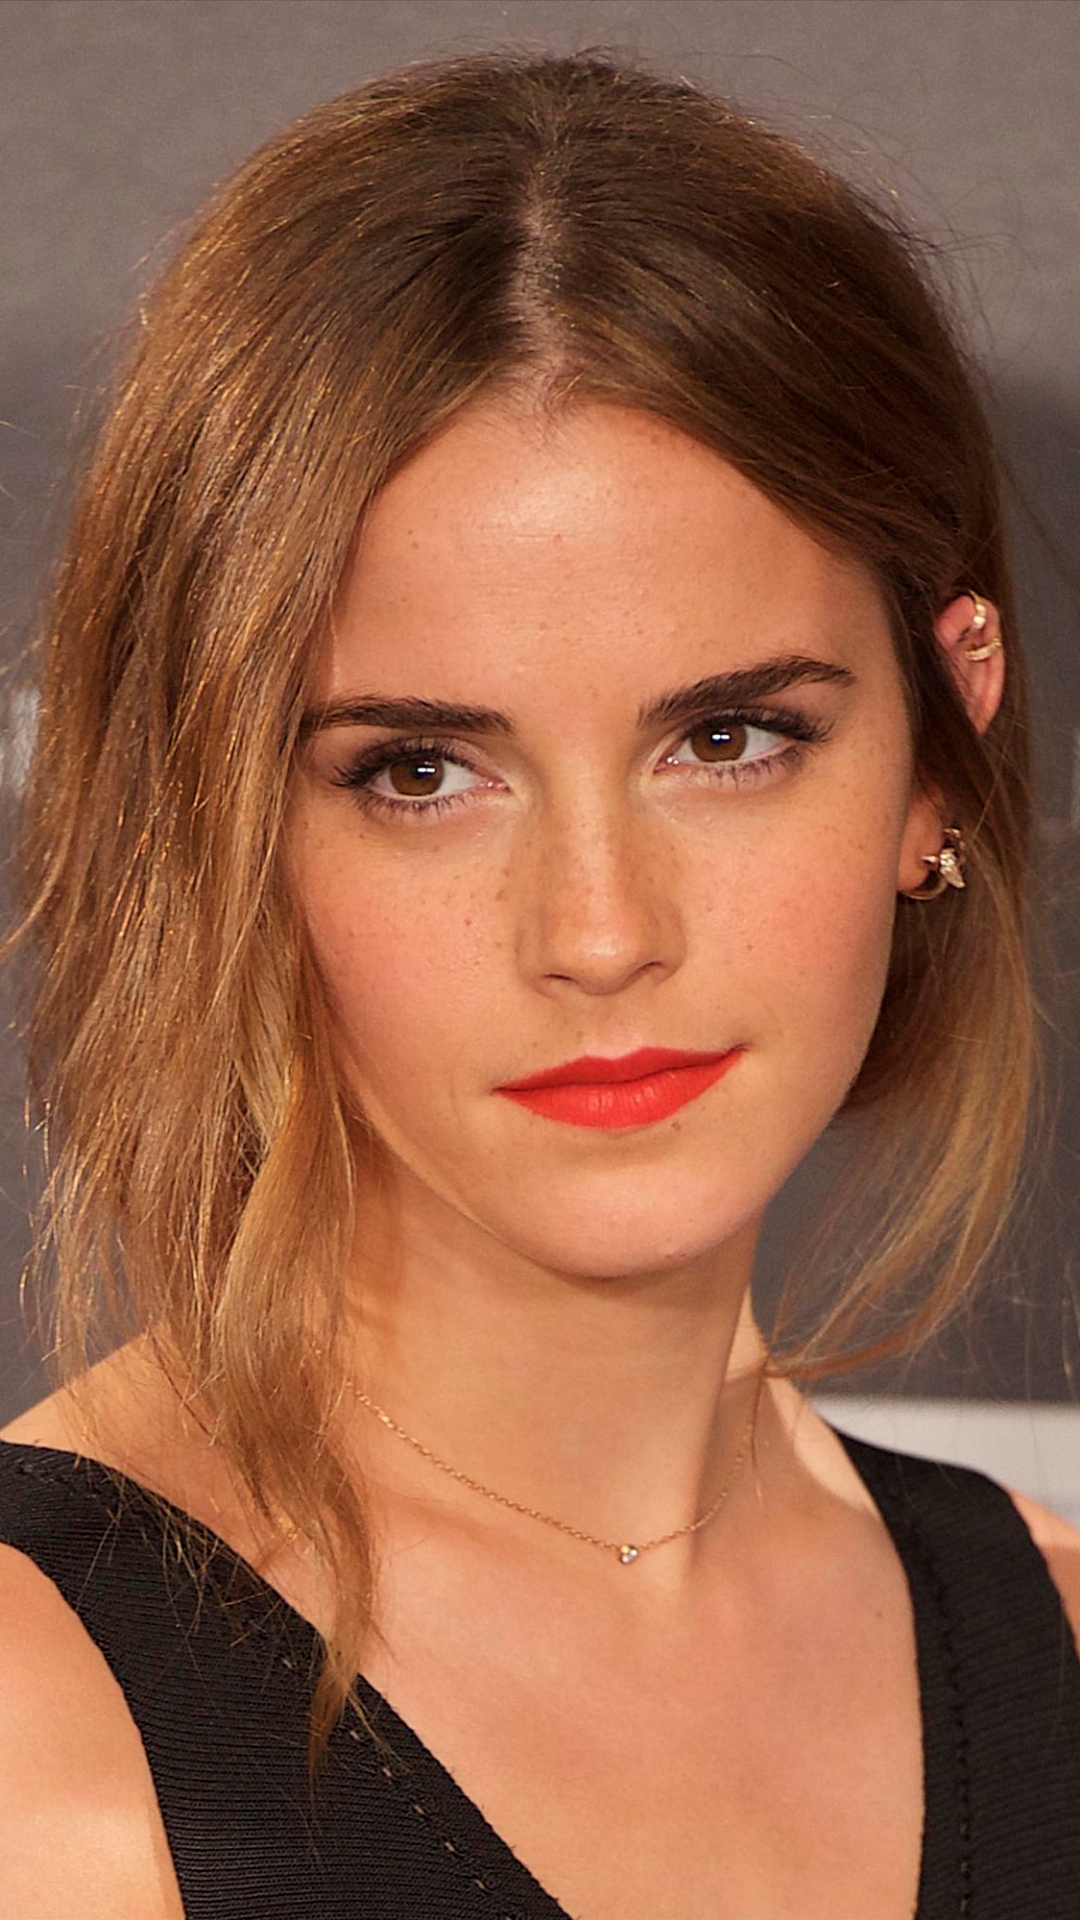 13 Famous Emma watson hd mobile wallpaper with articles 